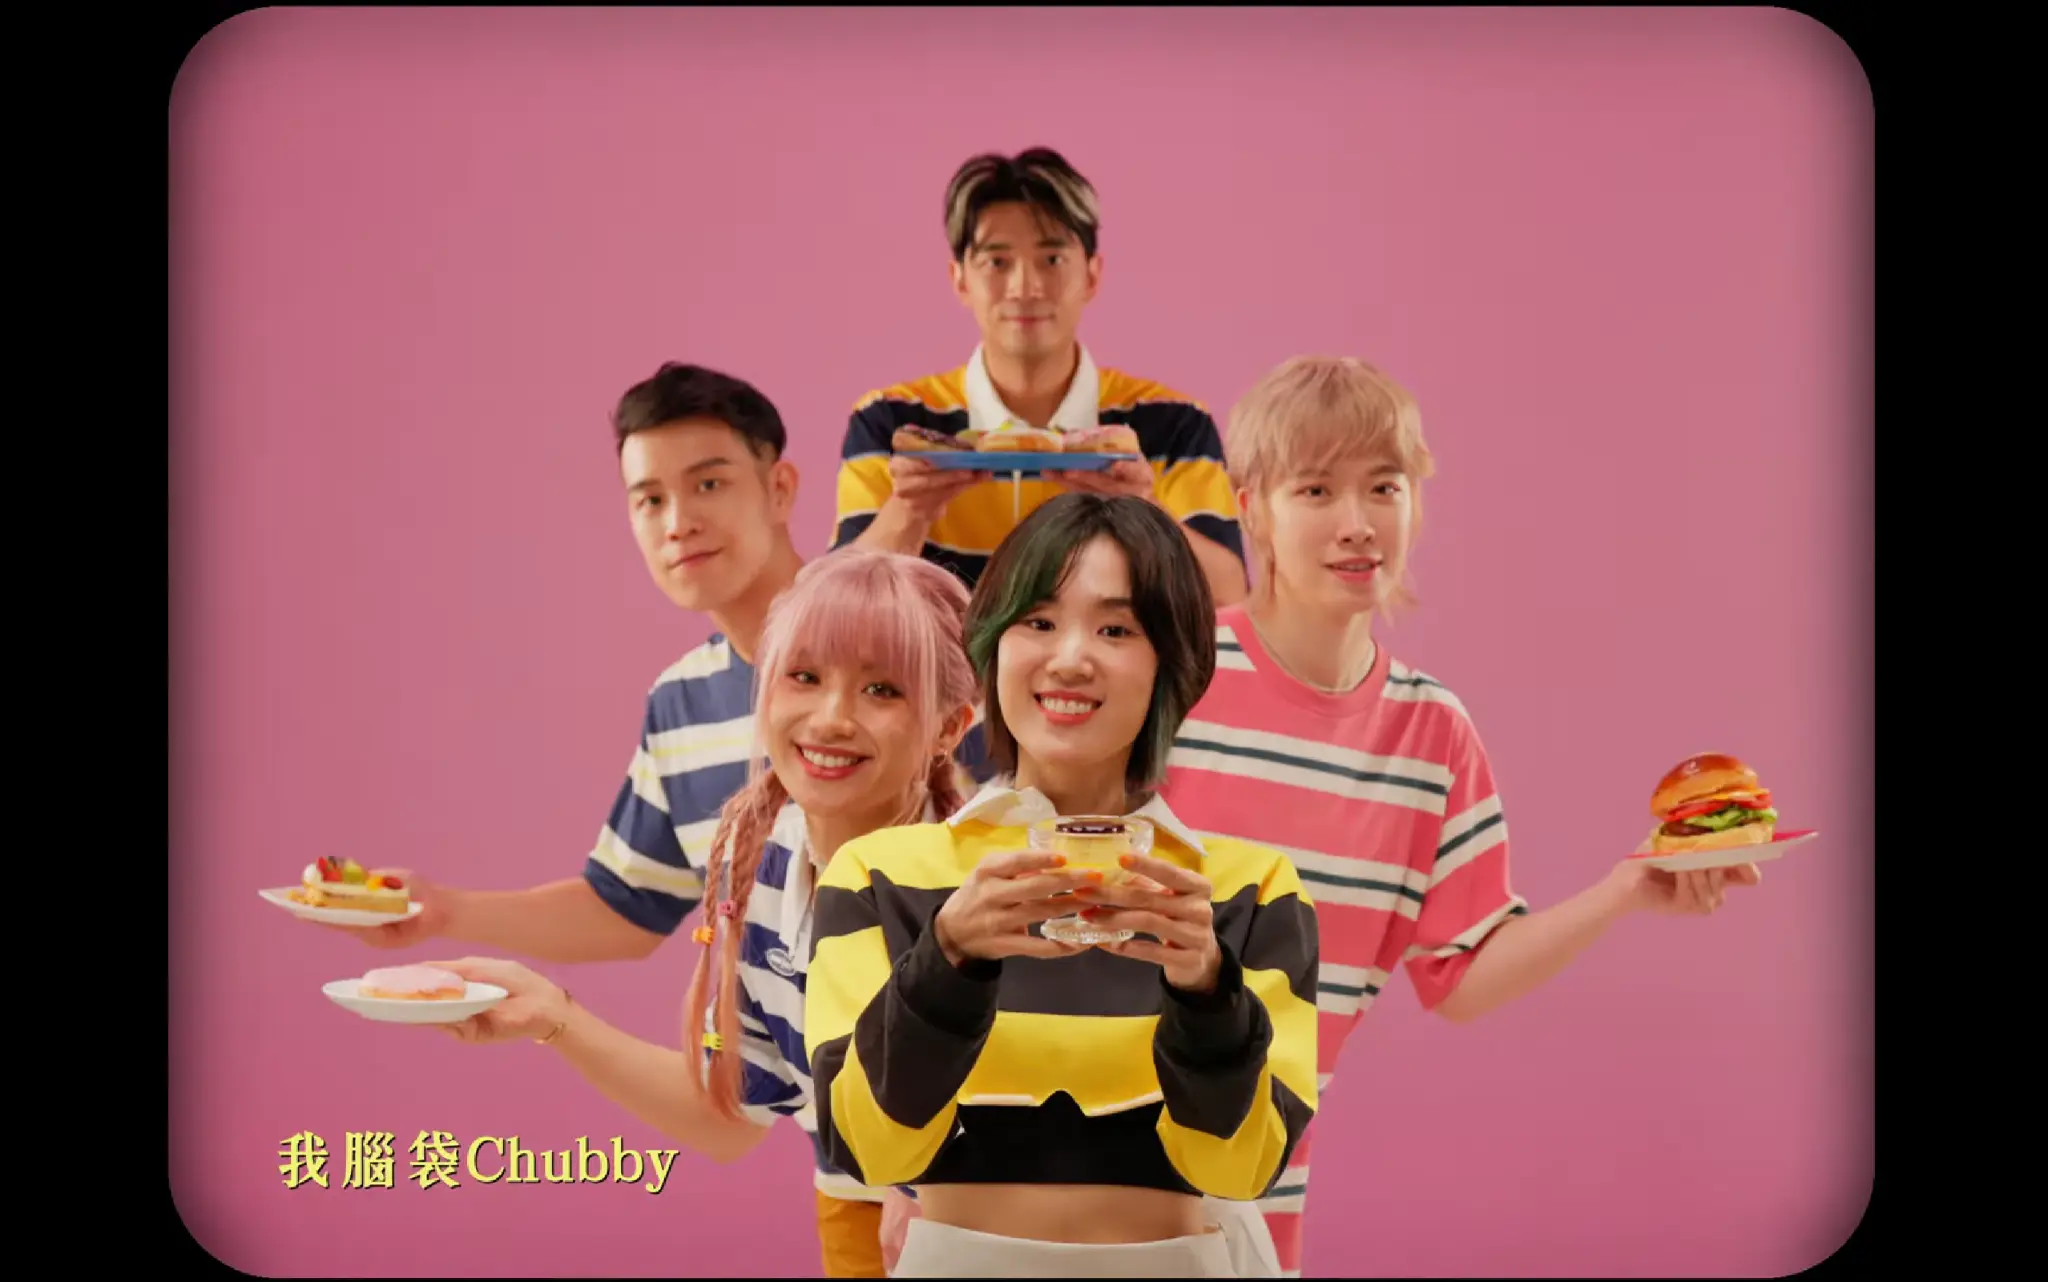 Taiwanese Pop Acapella Group The Wanted Announces Second Album Chubby! Chubby!